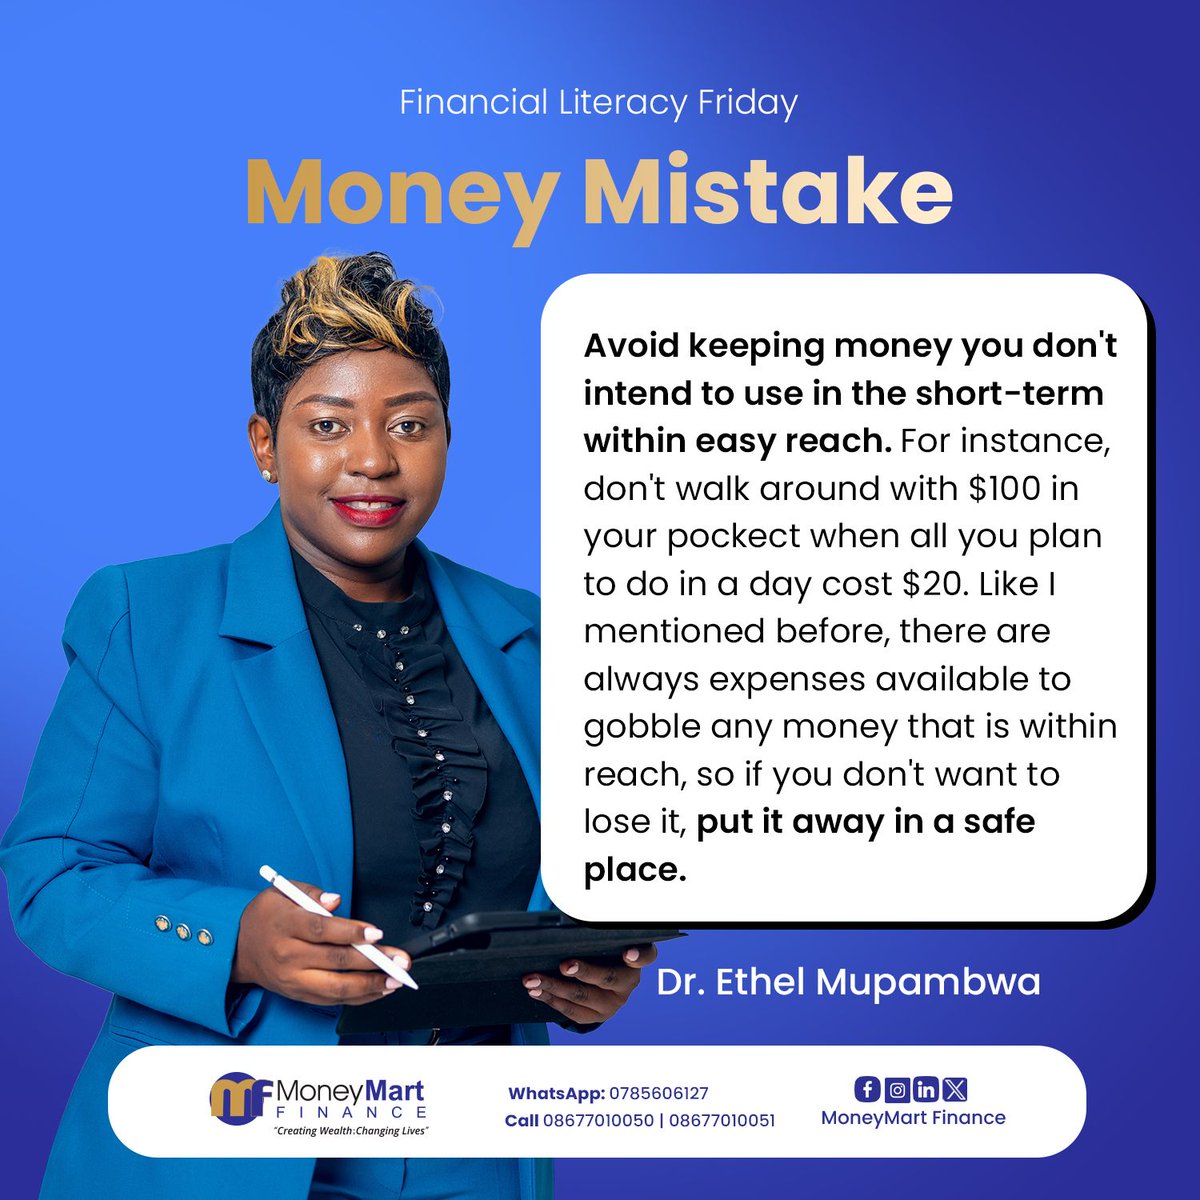 Financial Literacy Friday!

Money Mistake; Avoid keeping money you don't intend to use in the short-term within easy reach.

#financialliteracy #financialfreedom #FinancialPlanning #FinanceFriday